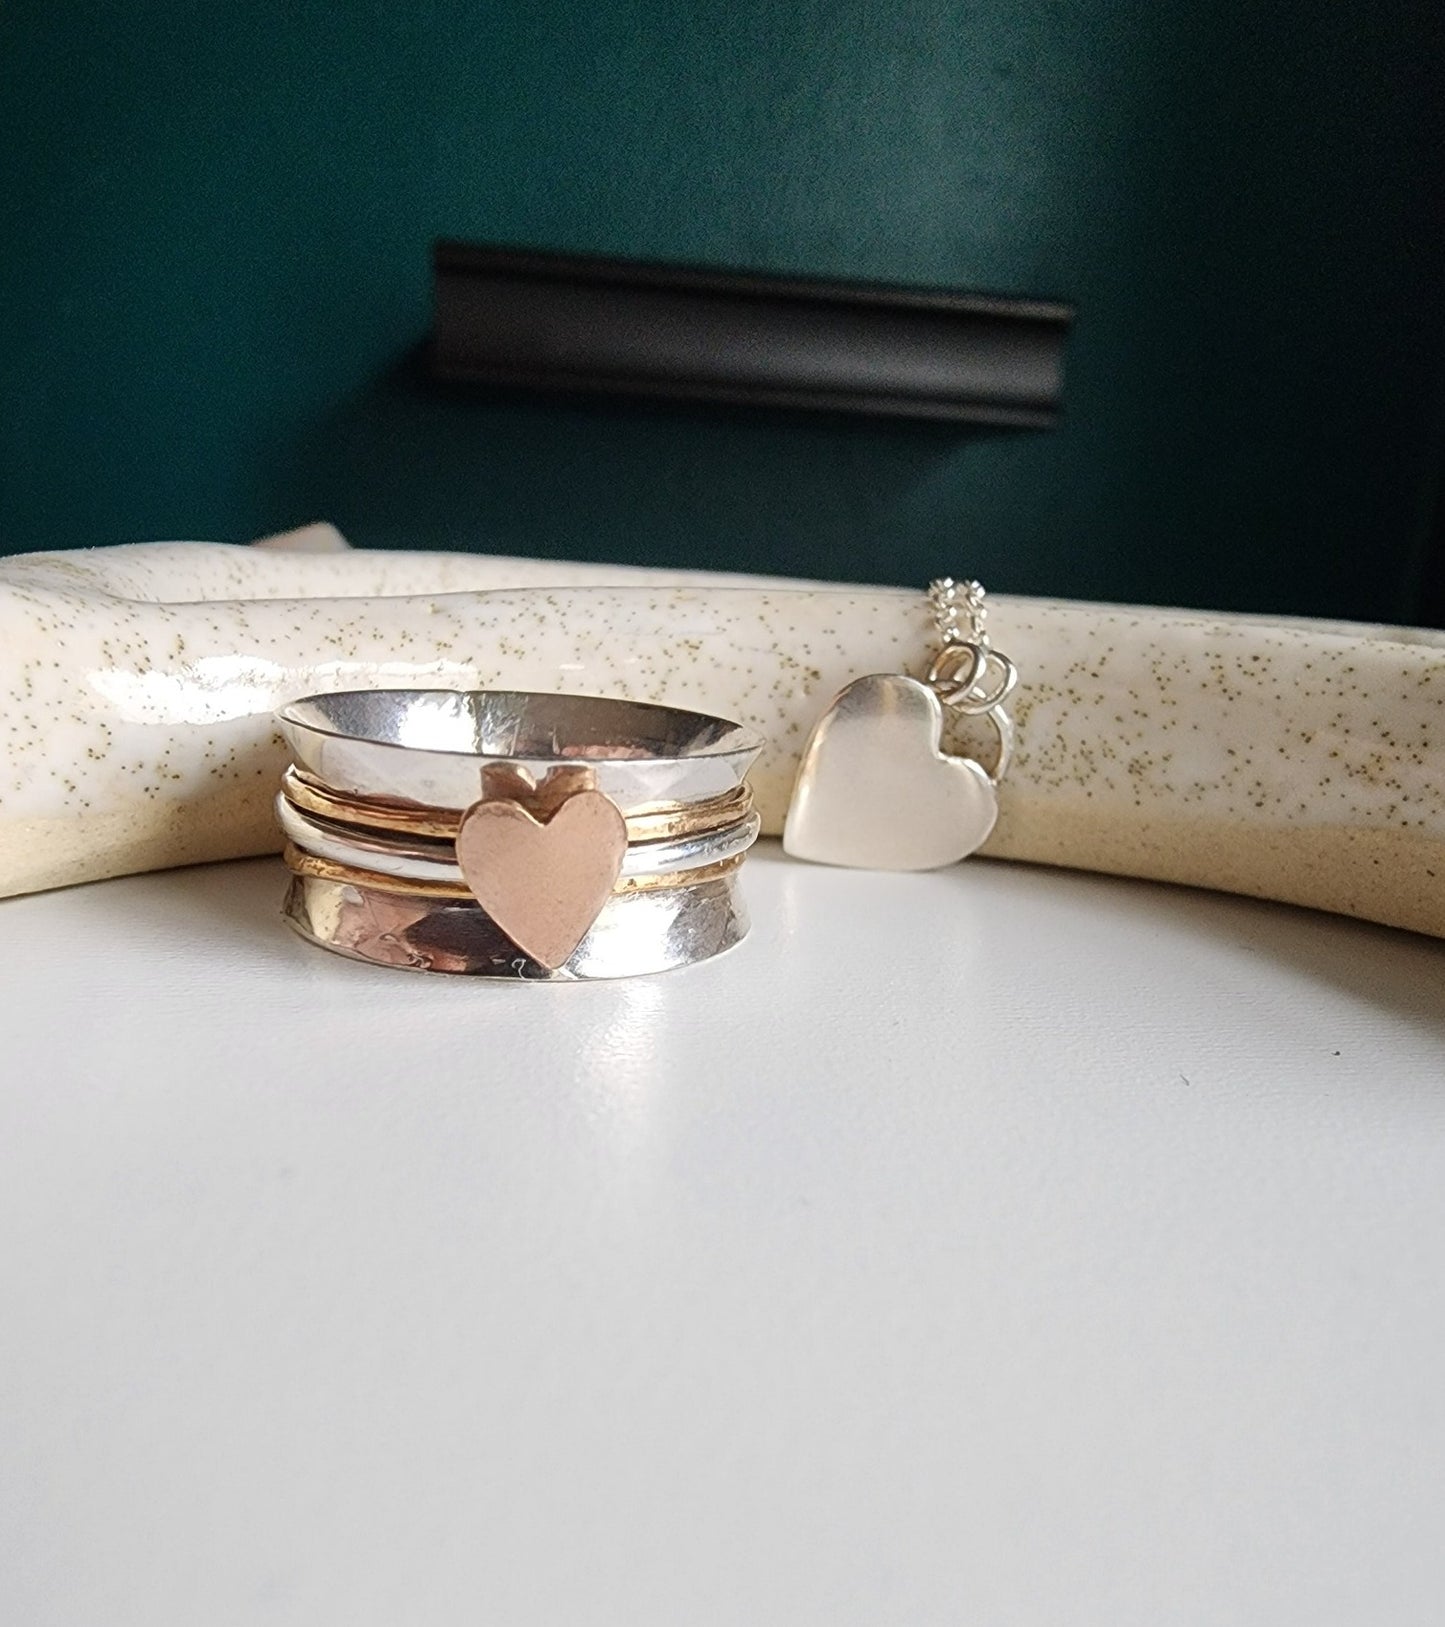 Silver textured wide band ring with three bands top band gold, middle band silver with a rose gold heart, bottom band is gold. Three bands mounted on a wide ring that spin freely, perfect for spinning of rings